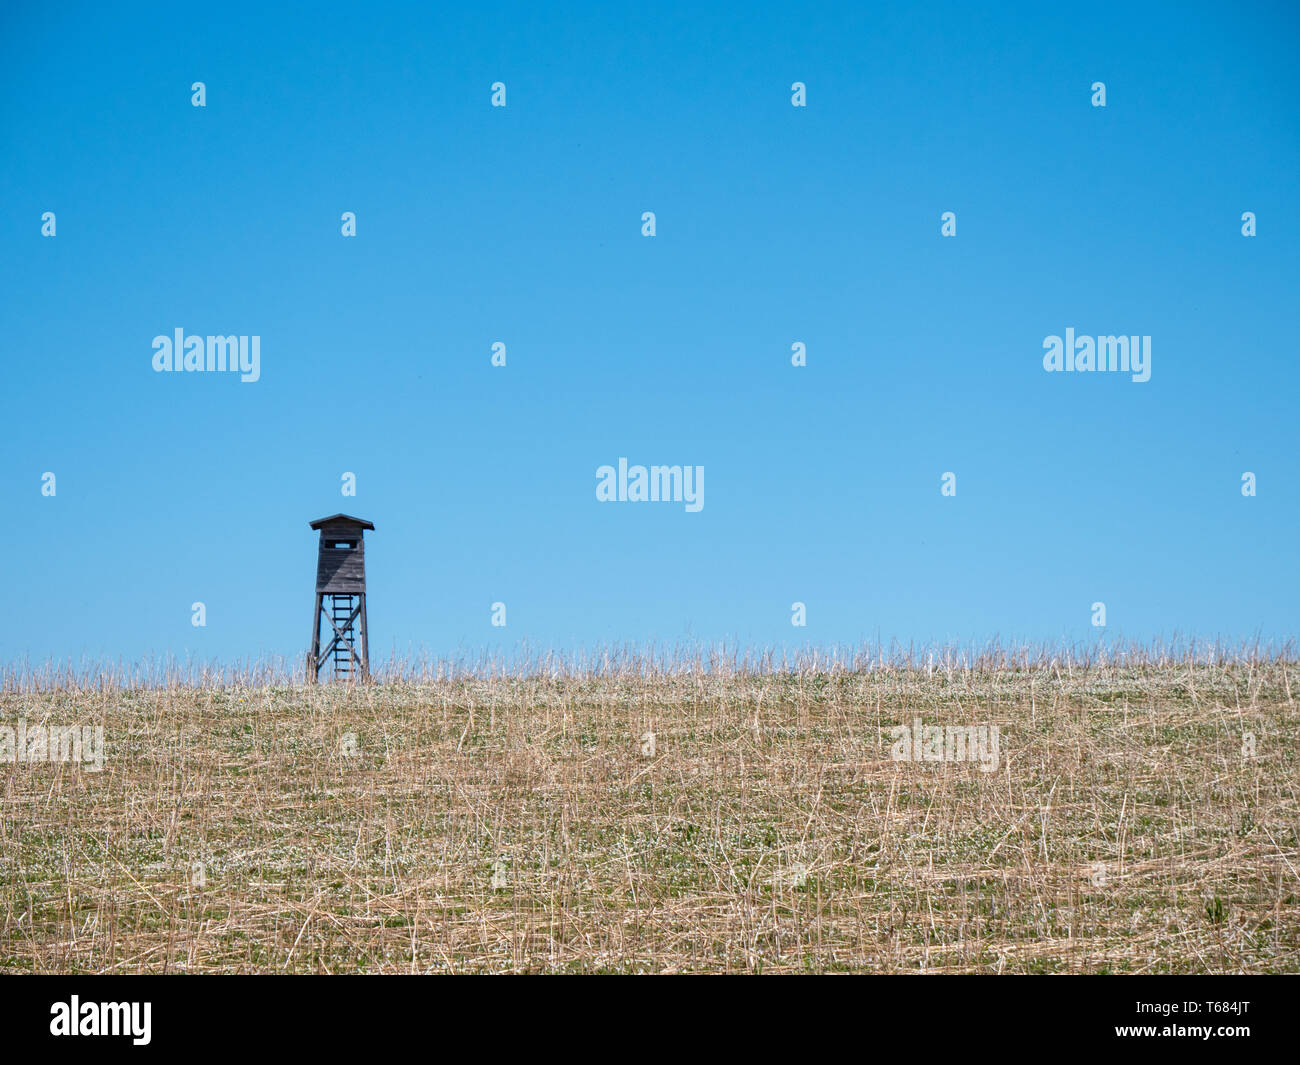 A Hunting Perch or High Seat in a Field with Dry Grass in a Lonely Rural Area in Austria Stock Photo